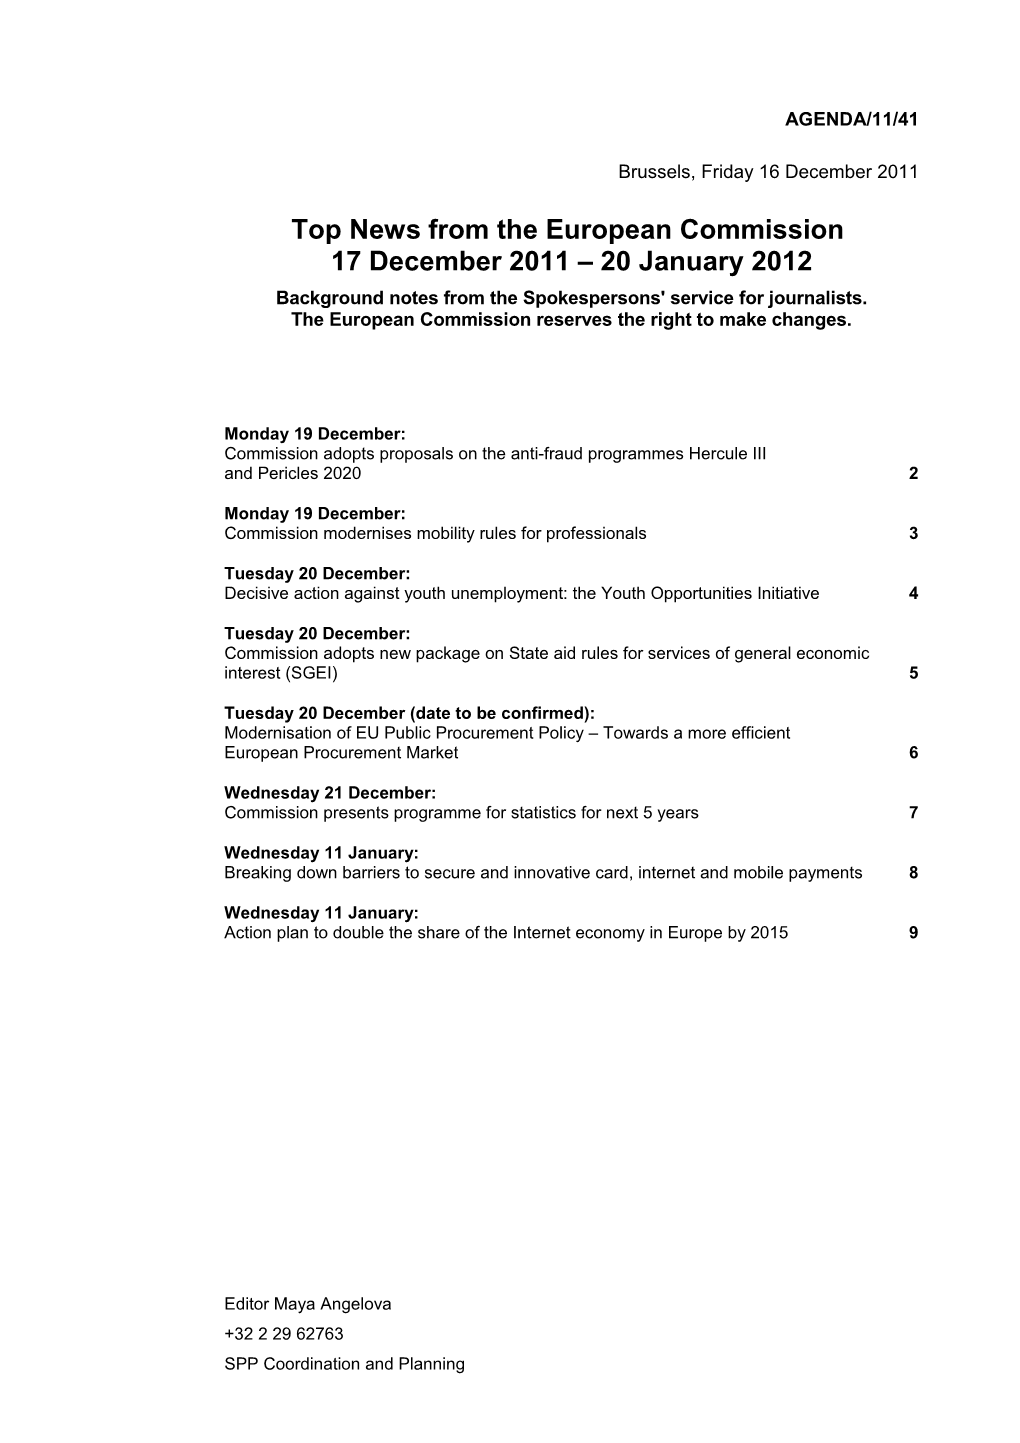 Top News from the European Commission 17December2011 20January2012